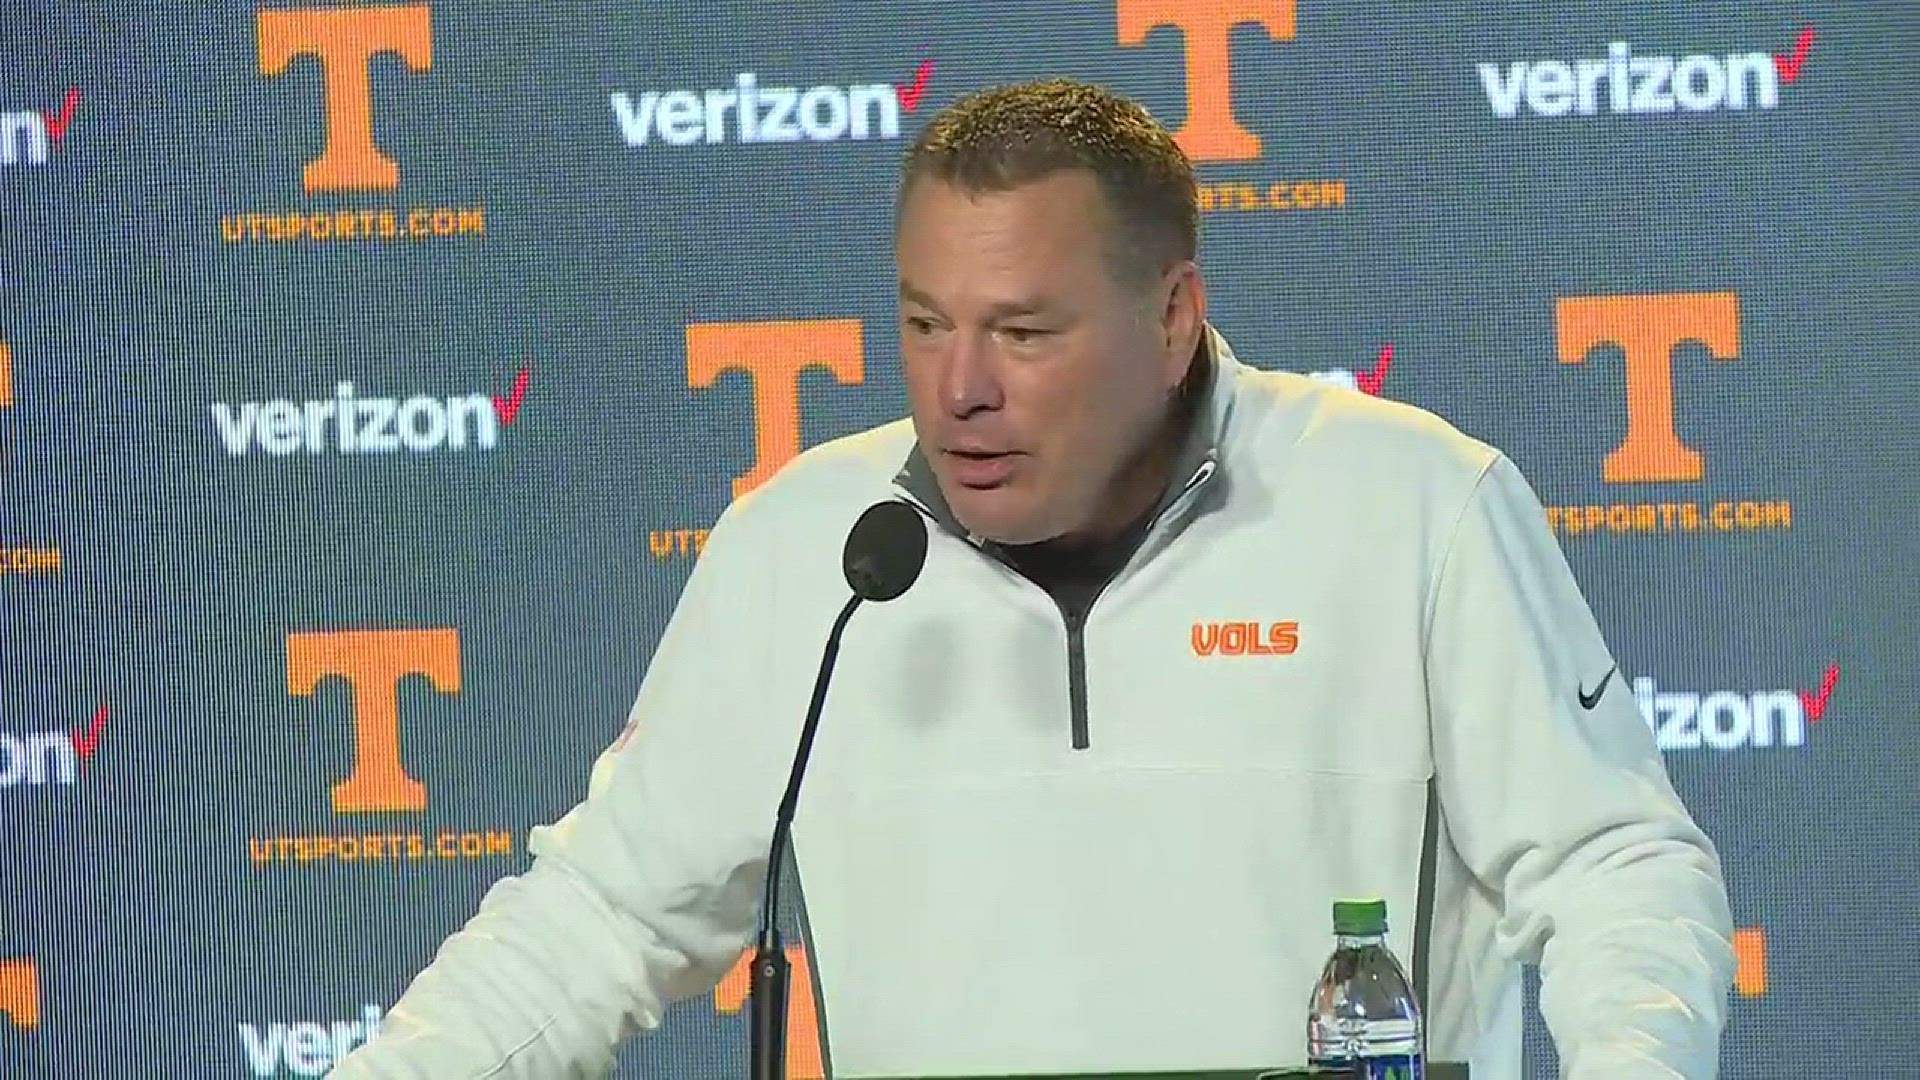 At his Monday press conference before the South Carolina game, Butch Jones addressed Darrell Taylor's suspension and the state of the Vols locker room.